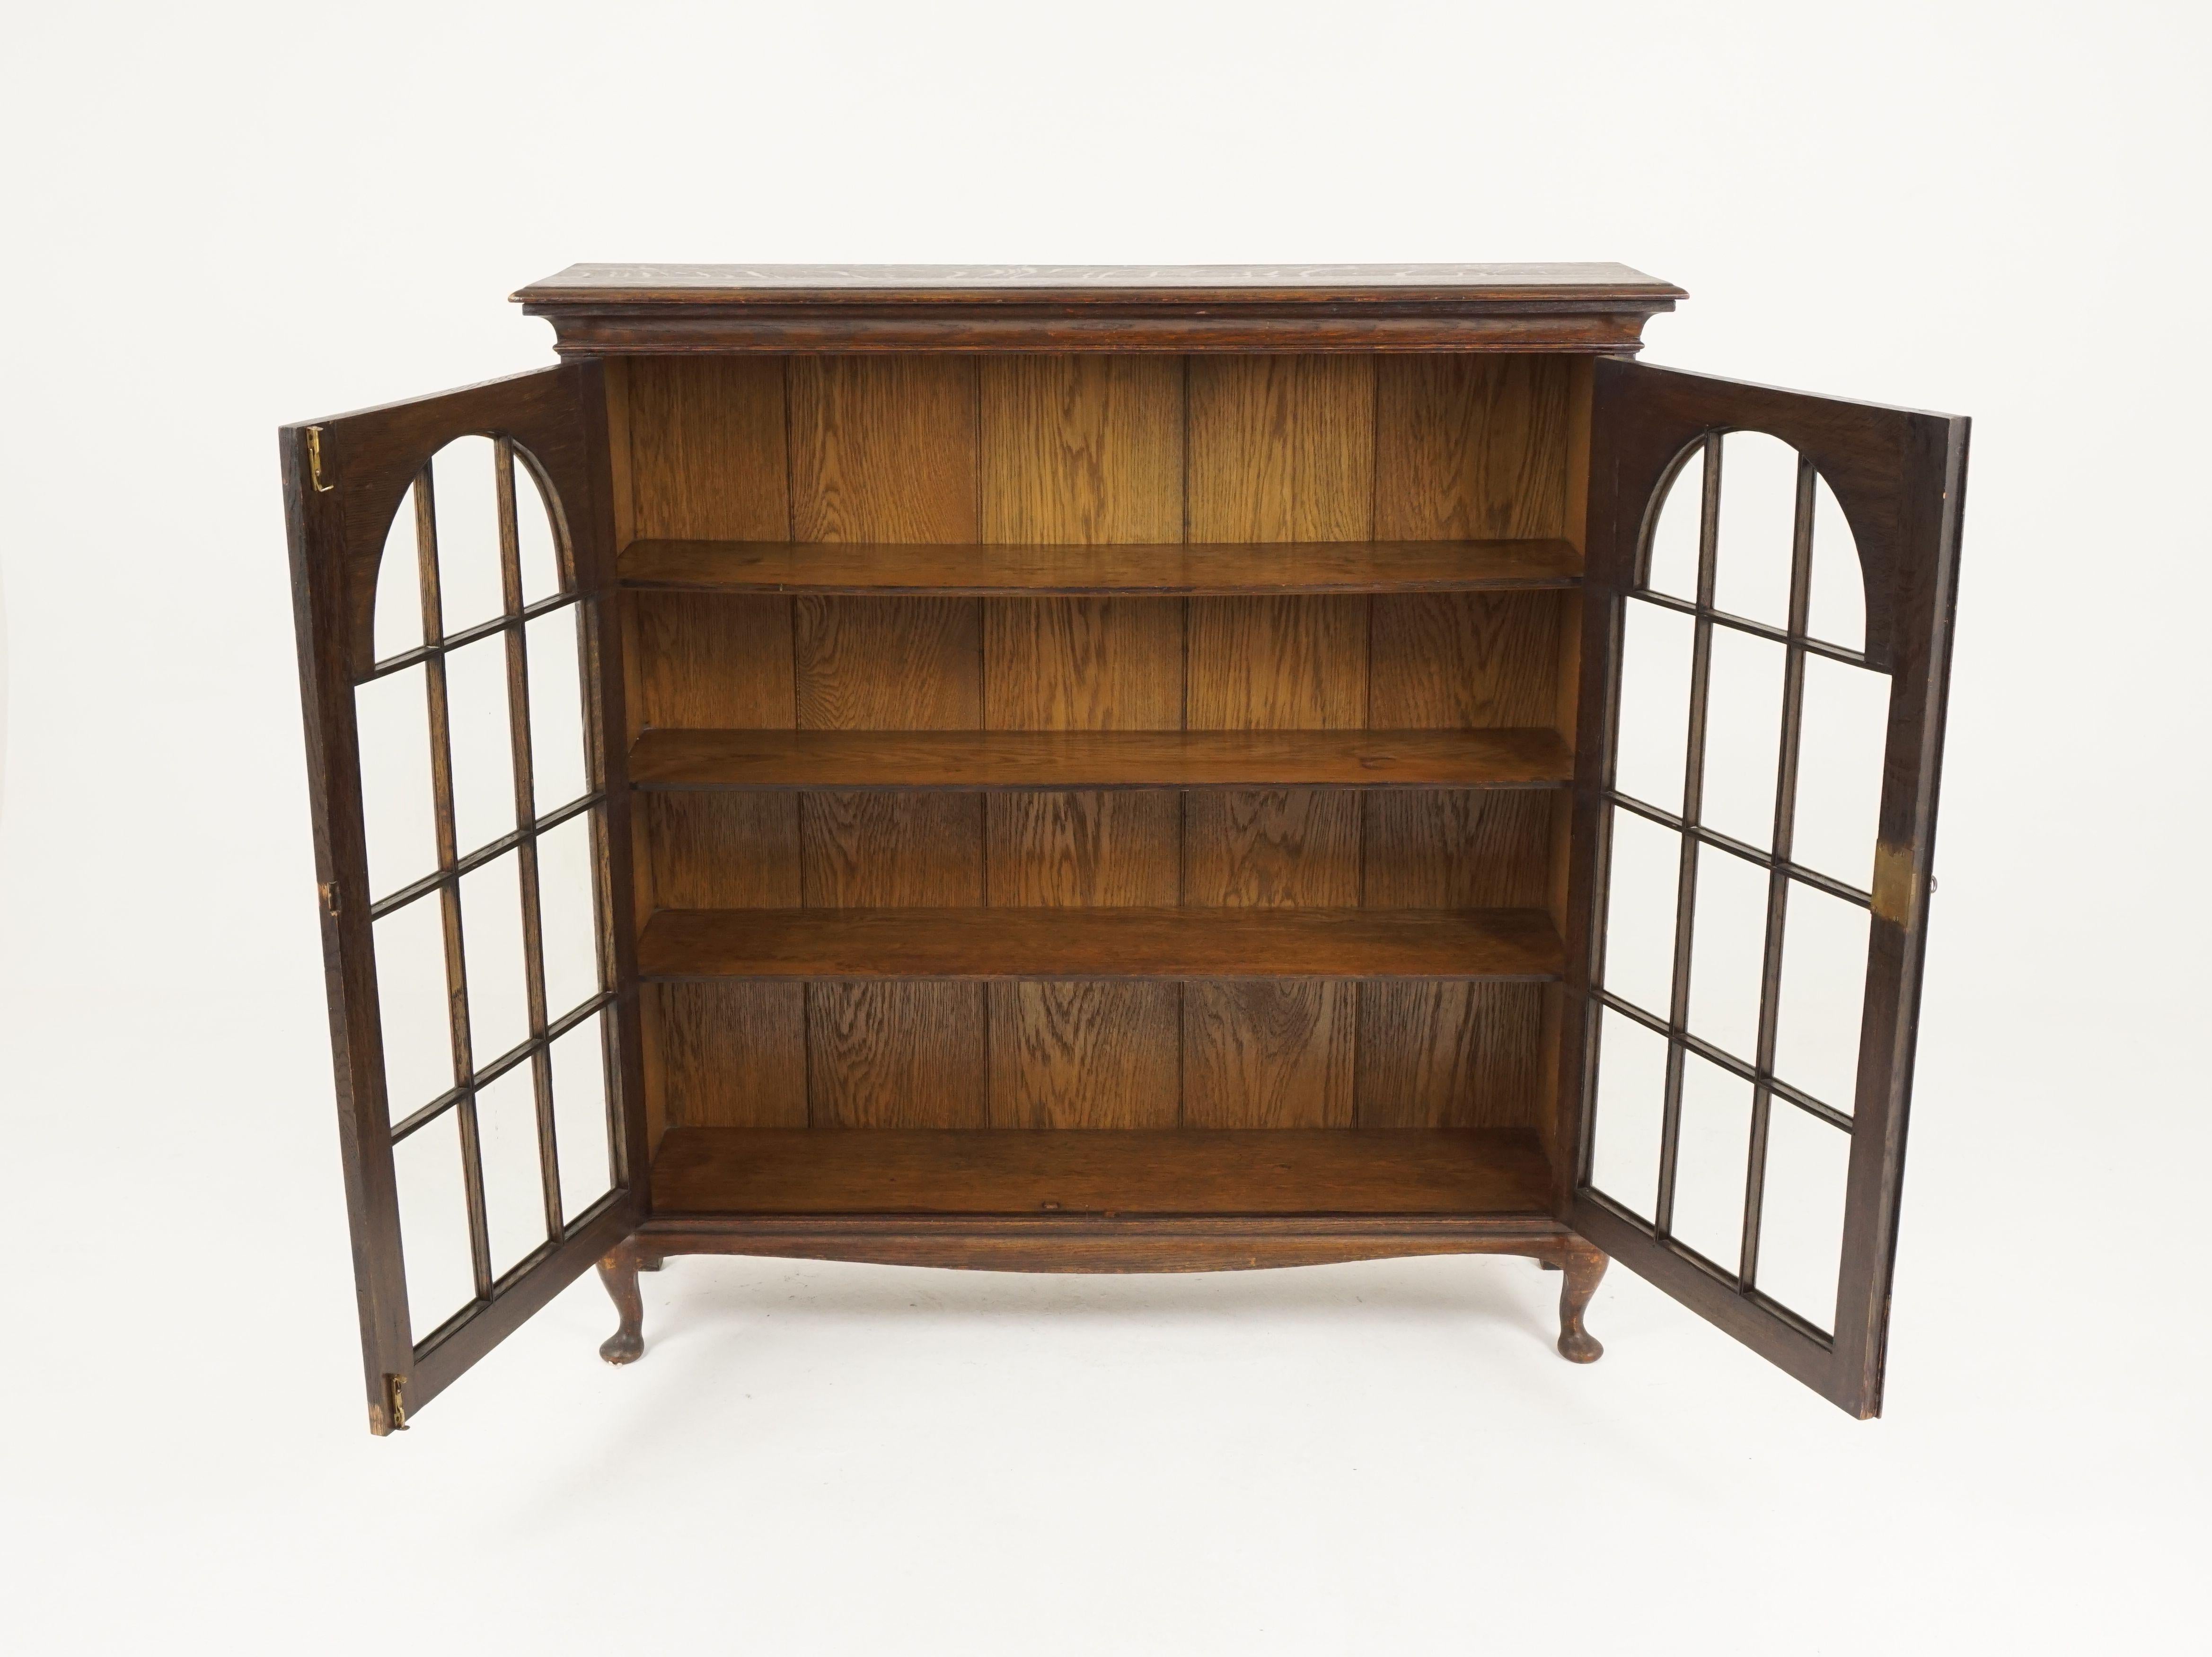 Antique tiger oak bookcase, display cabinet, Scotland, 1920

Scotland, 1920
Solid oak
Original finish
Rectangular moulded top
Pair of thirteen panes dome shaped doors
Open to reveal vertical backboards
Three fixed shields
With working lock